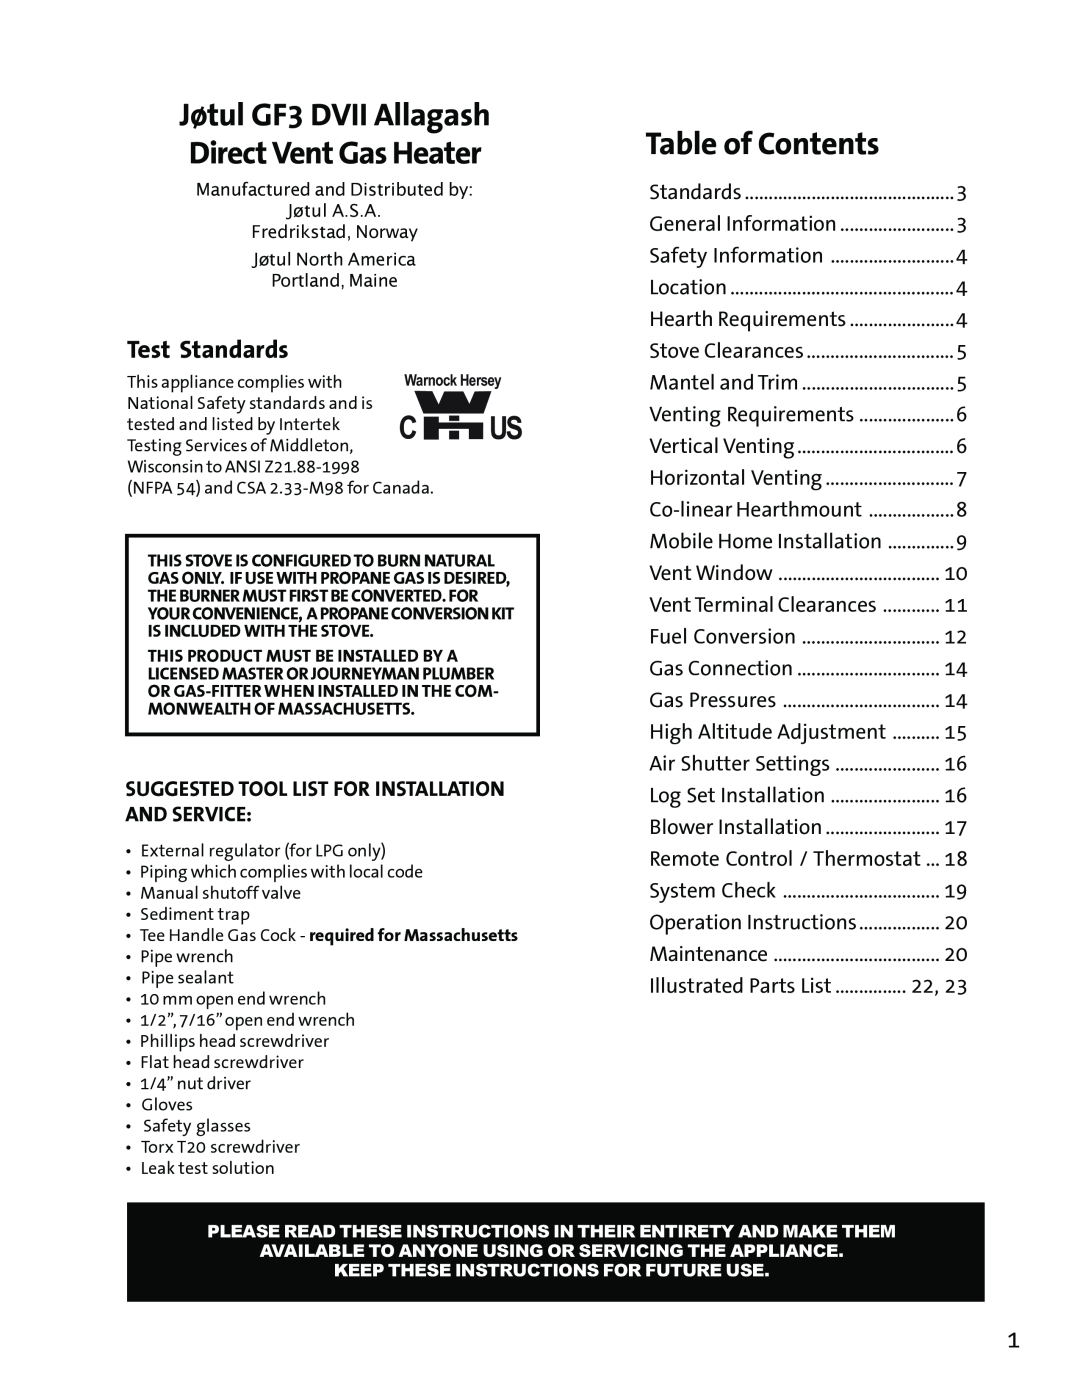 Jotul GF3 DVII manual Test Standards, Suggested Tool List For Installation And Service, Table of Contents 